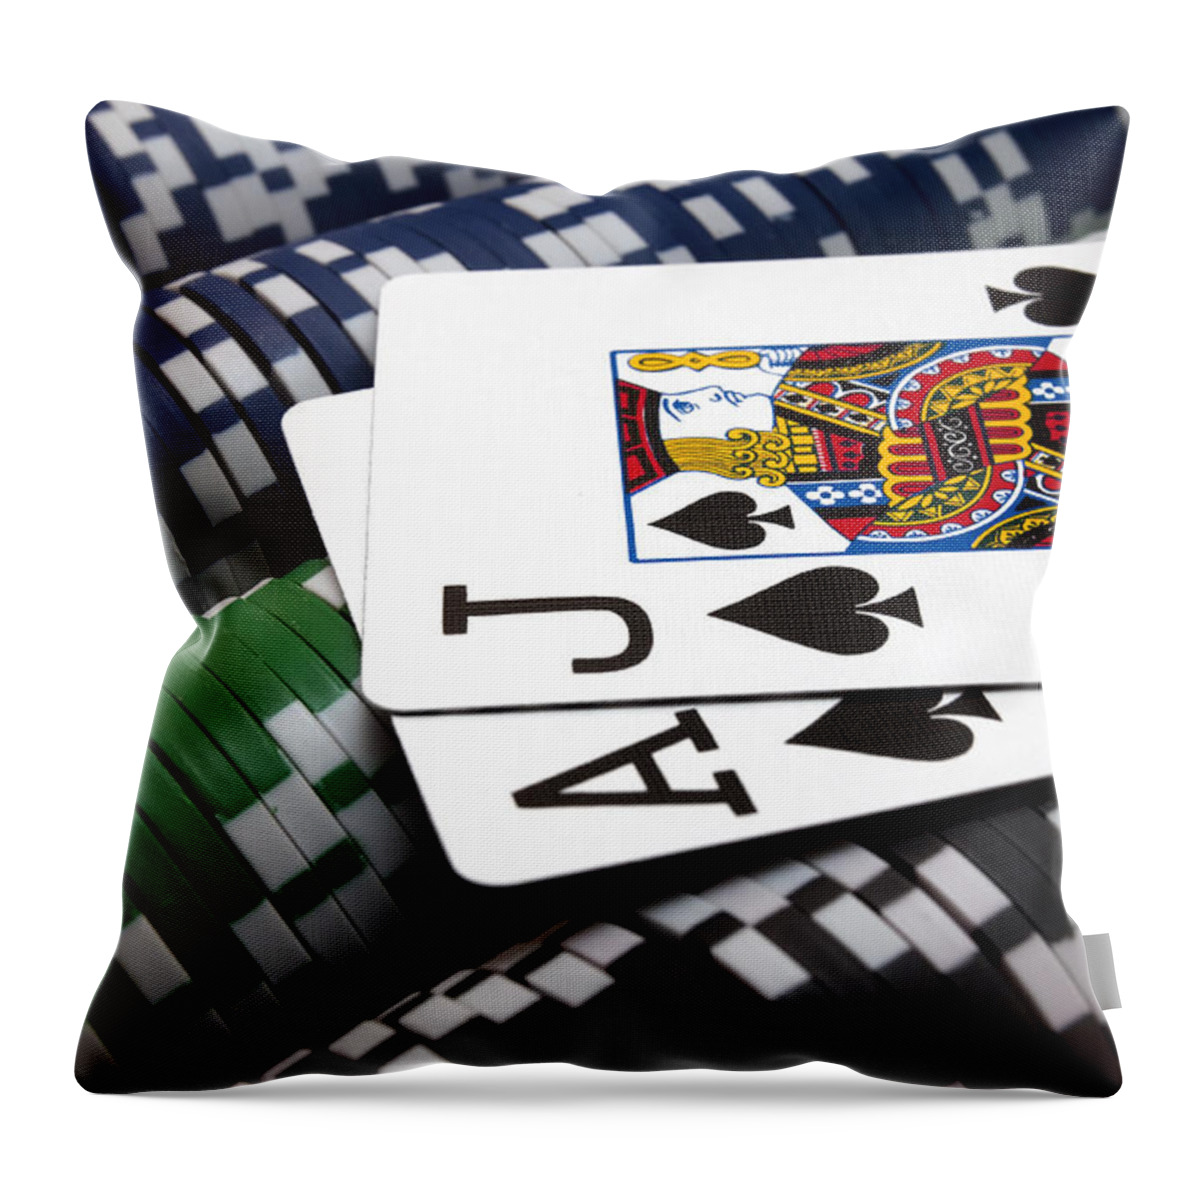 Playing Throw Pillow featuring the photograph Twenty One by Ricky Barnard